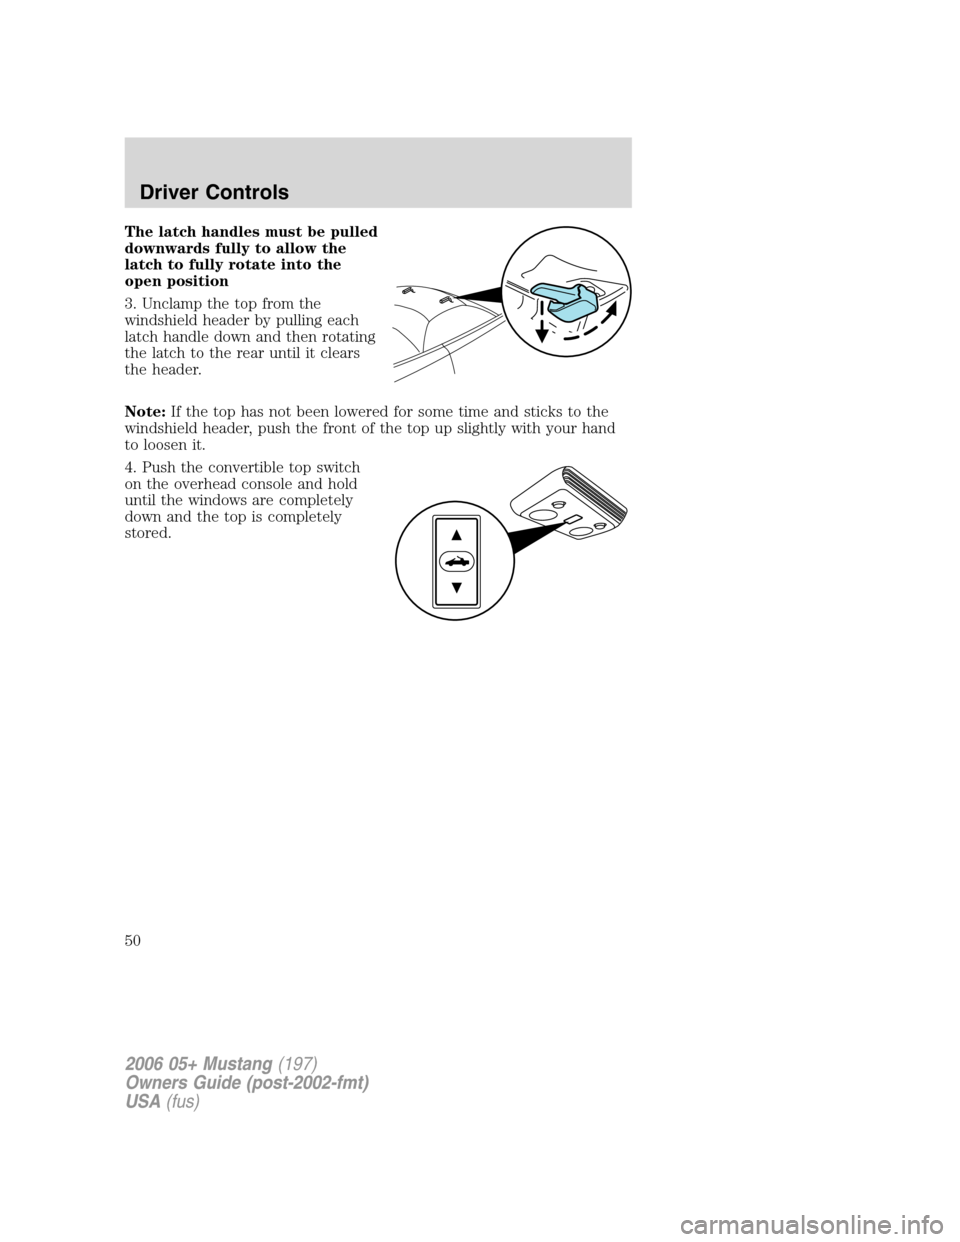 FORD MUSTANG 2006 5.G Service Manual The latch handles must be pulled
downwards fully to allow the
latch to fully rotate into the
open position
3. Unclamp the top from the
windshield header by pulling each
latch handle down and then rota